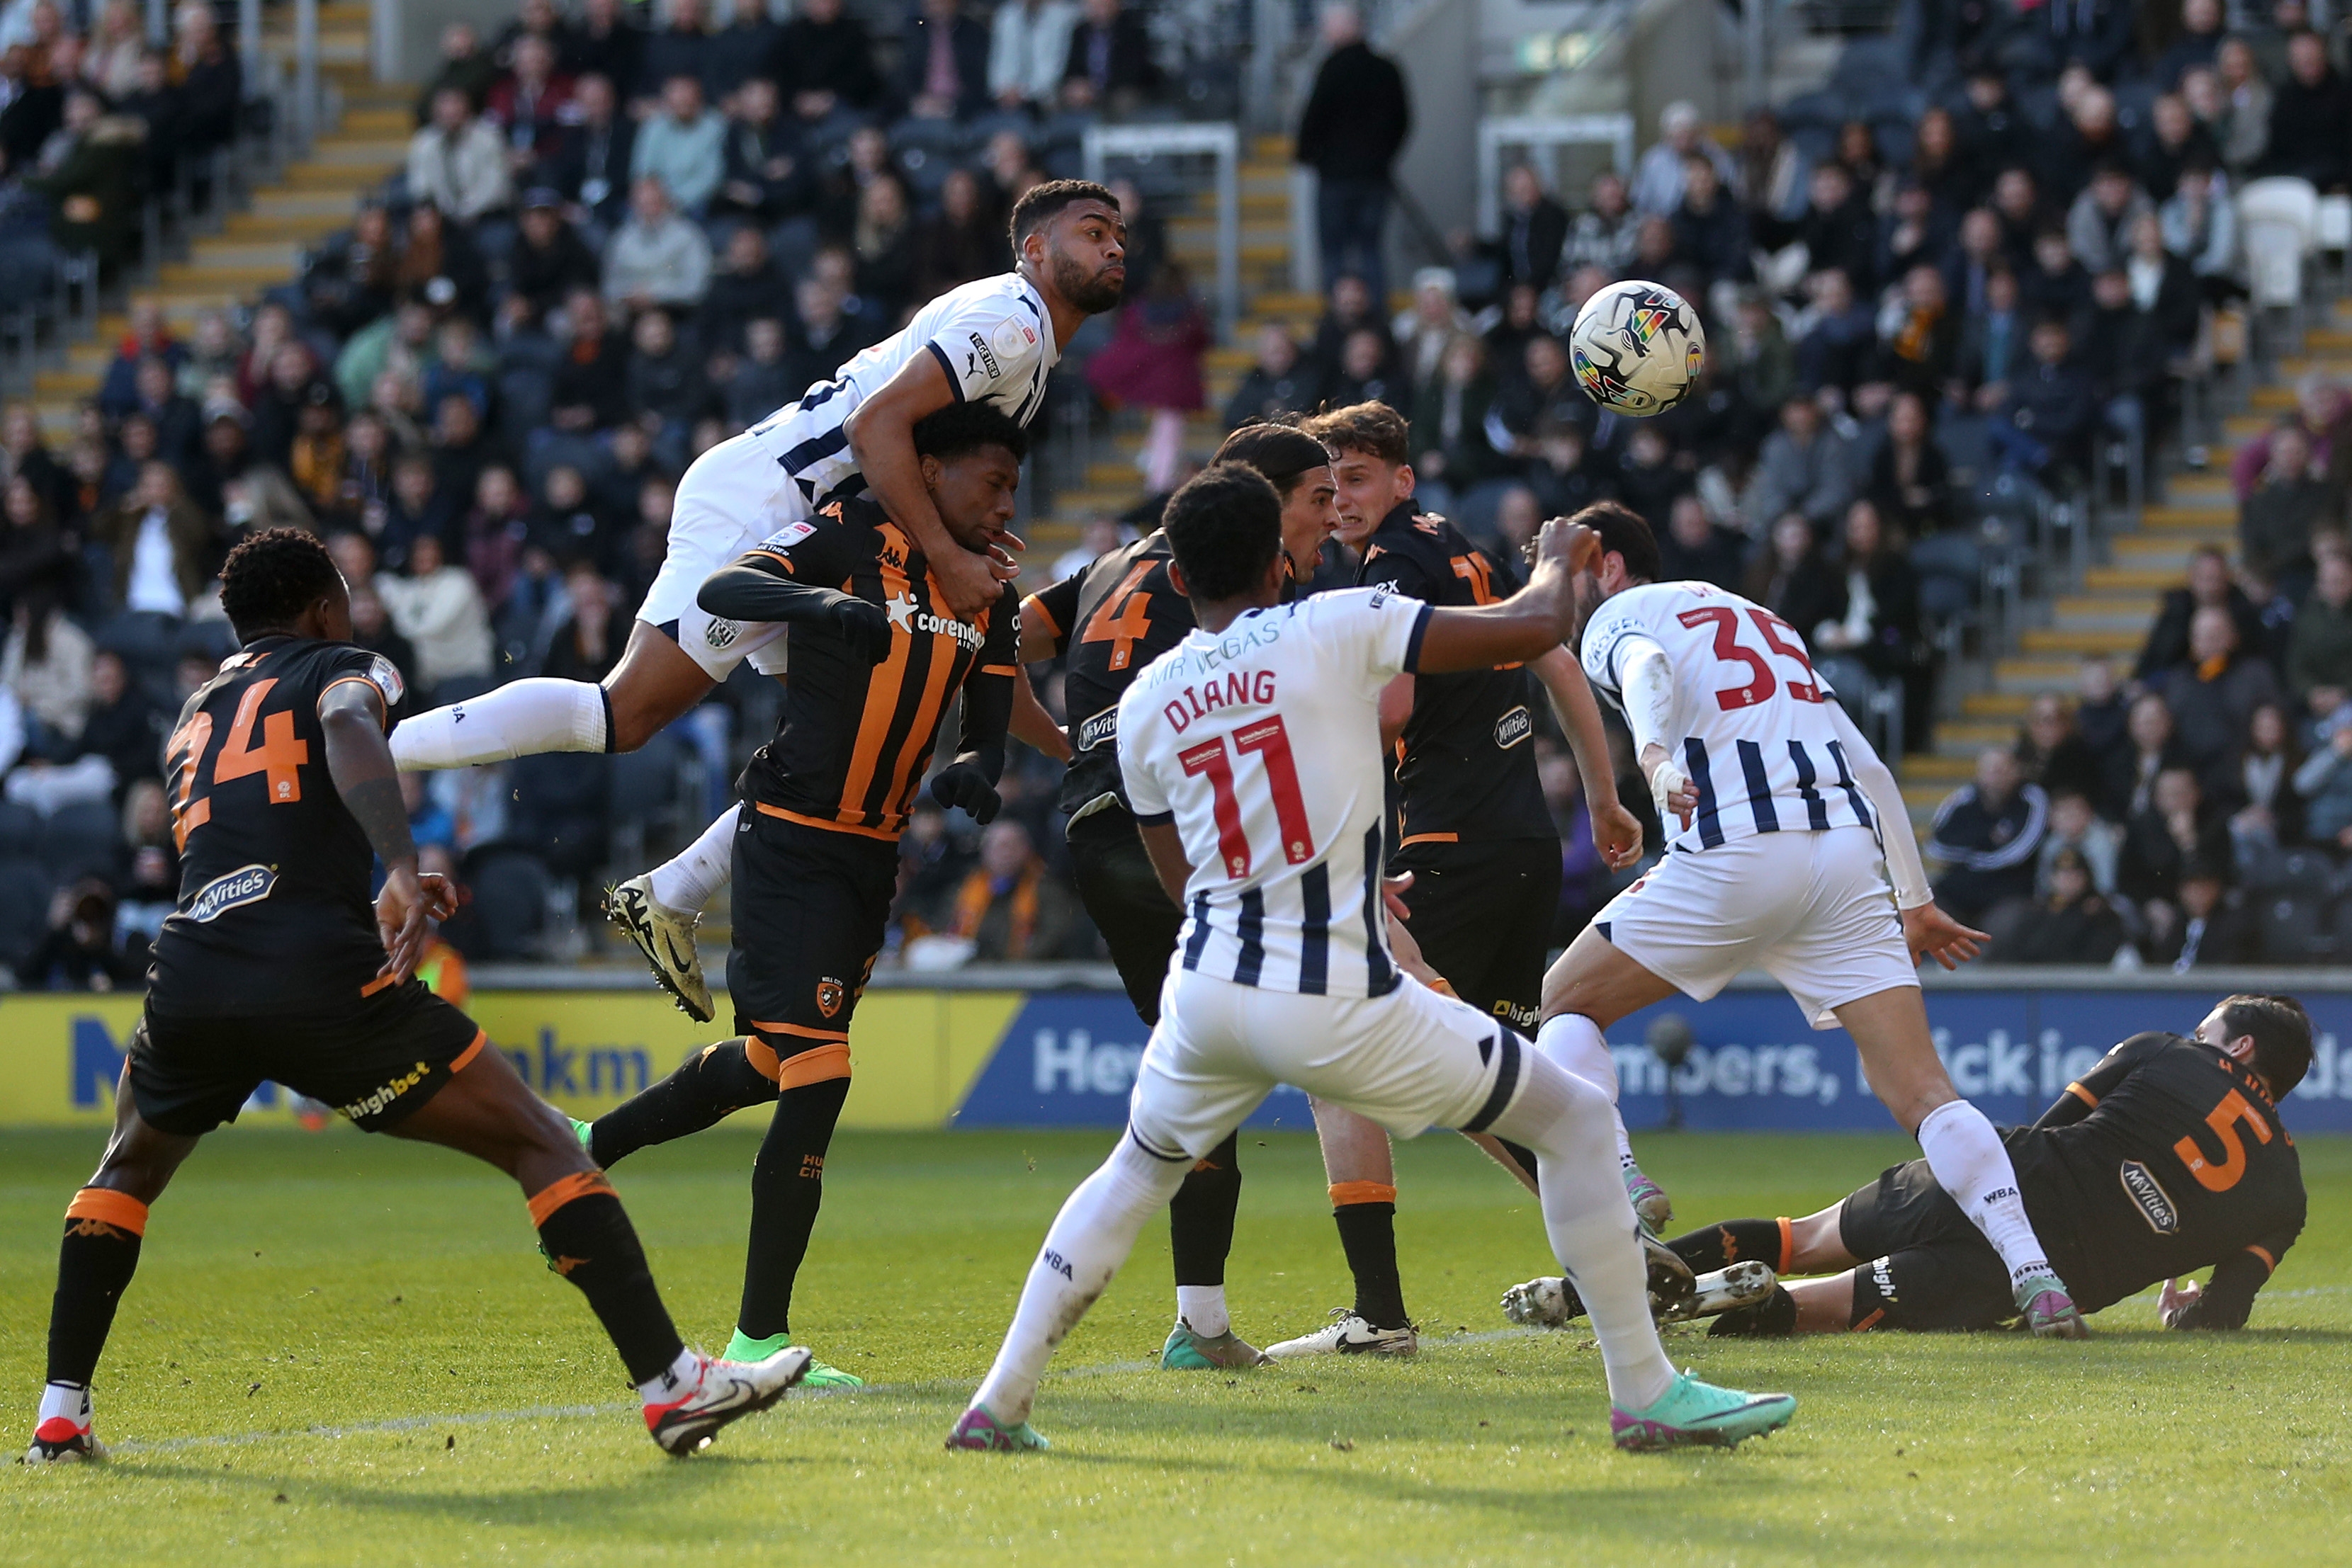 Albion and Hull players battle for the ball in the air in the penalty area